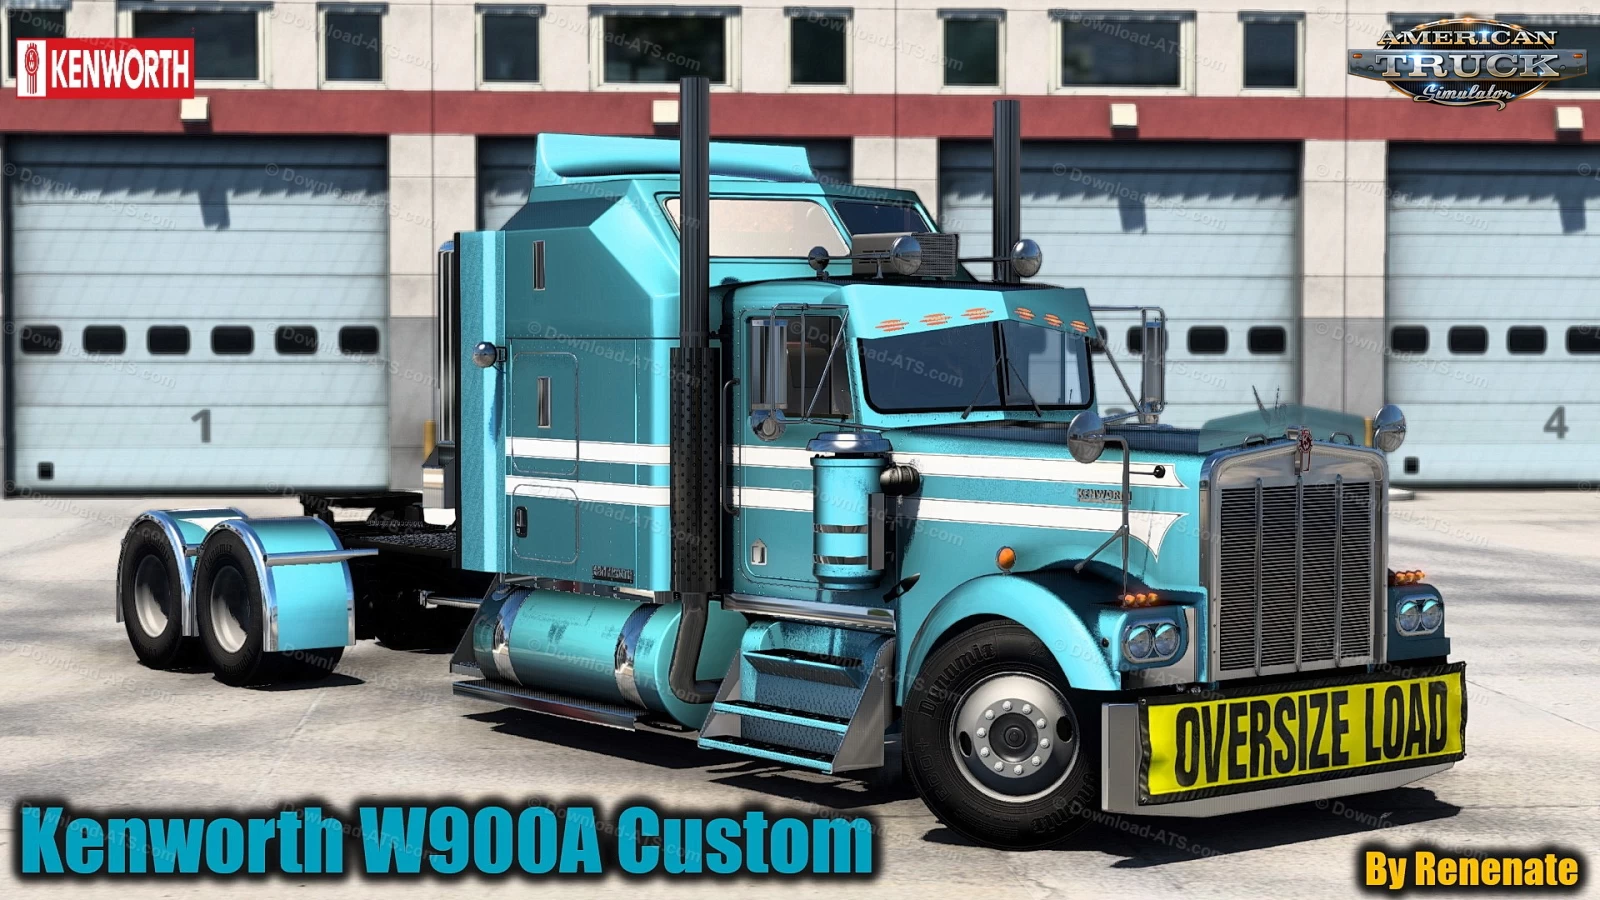 Kenworth W900A Custom Truck v1.4 by Renenate (1.44.x) for ATS